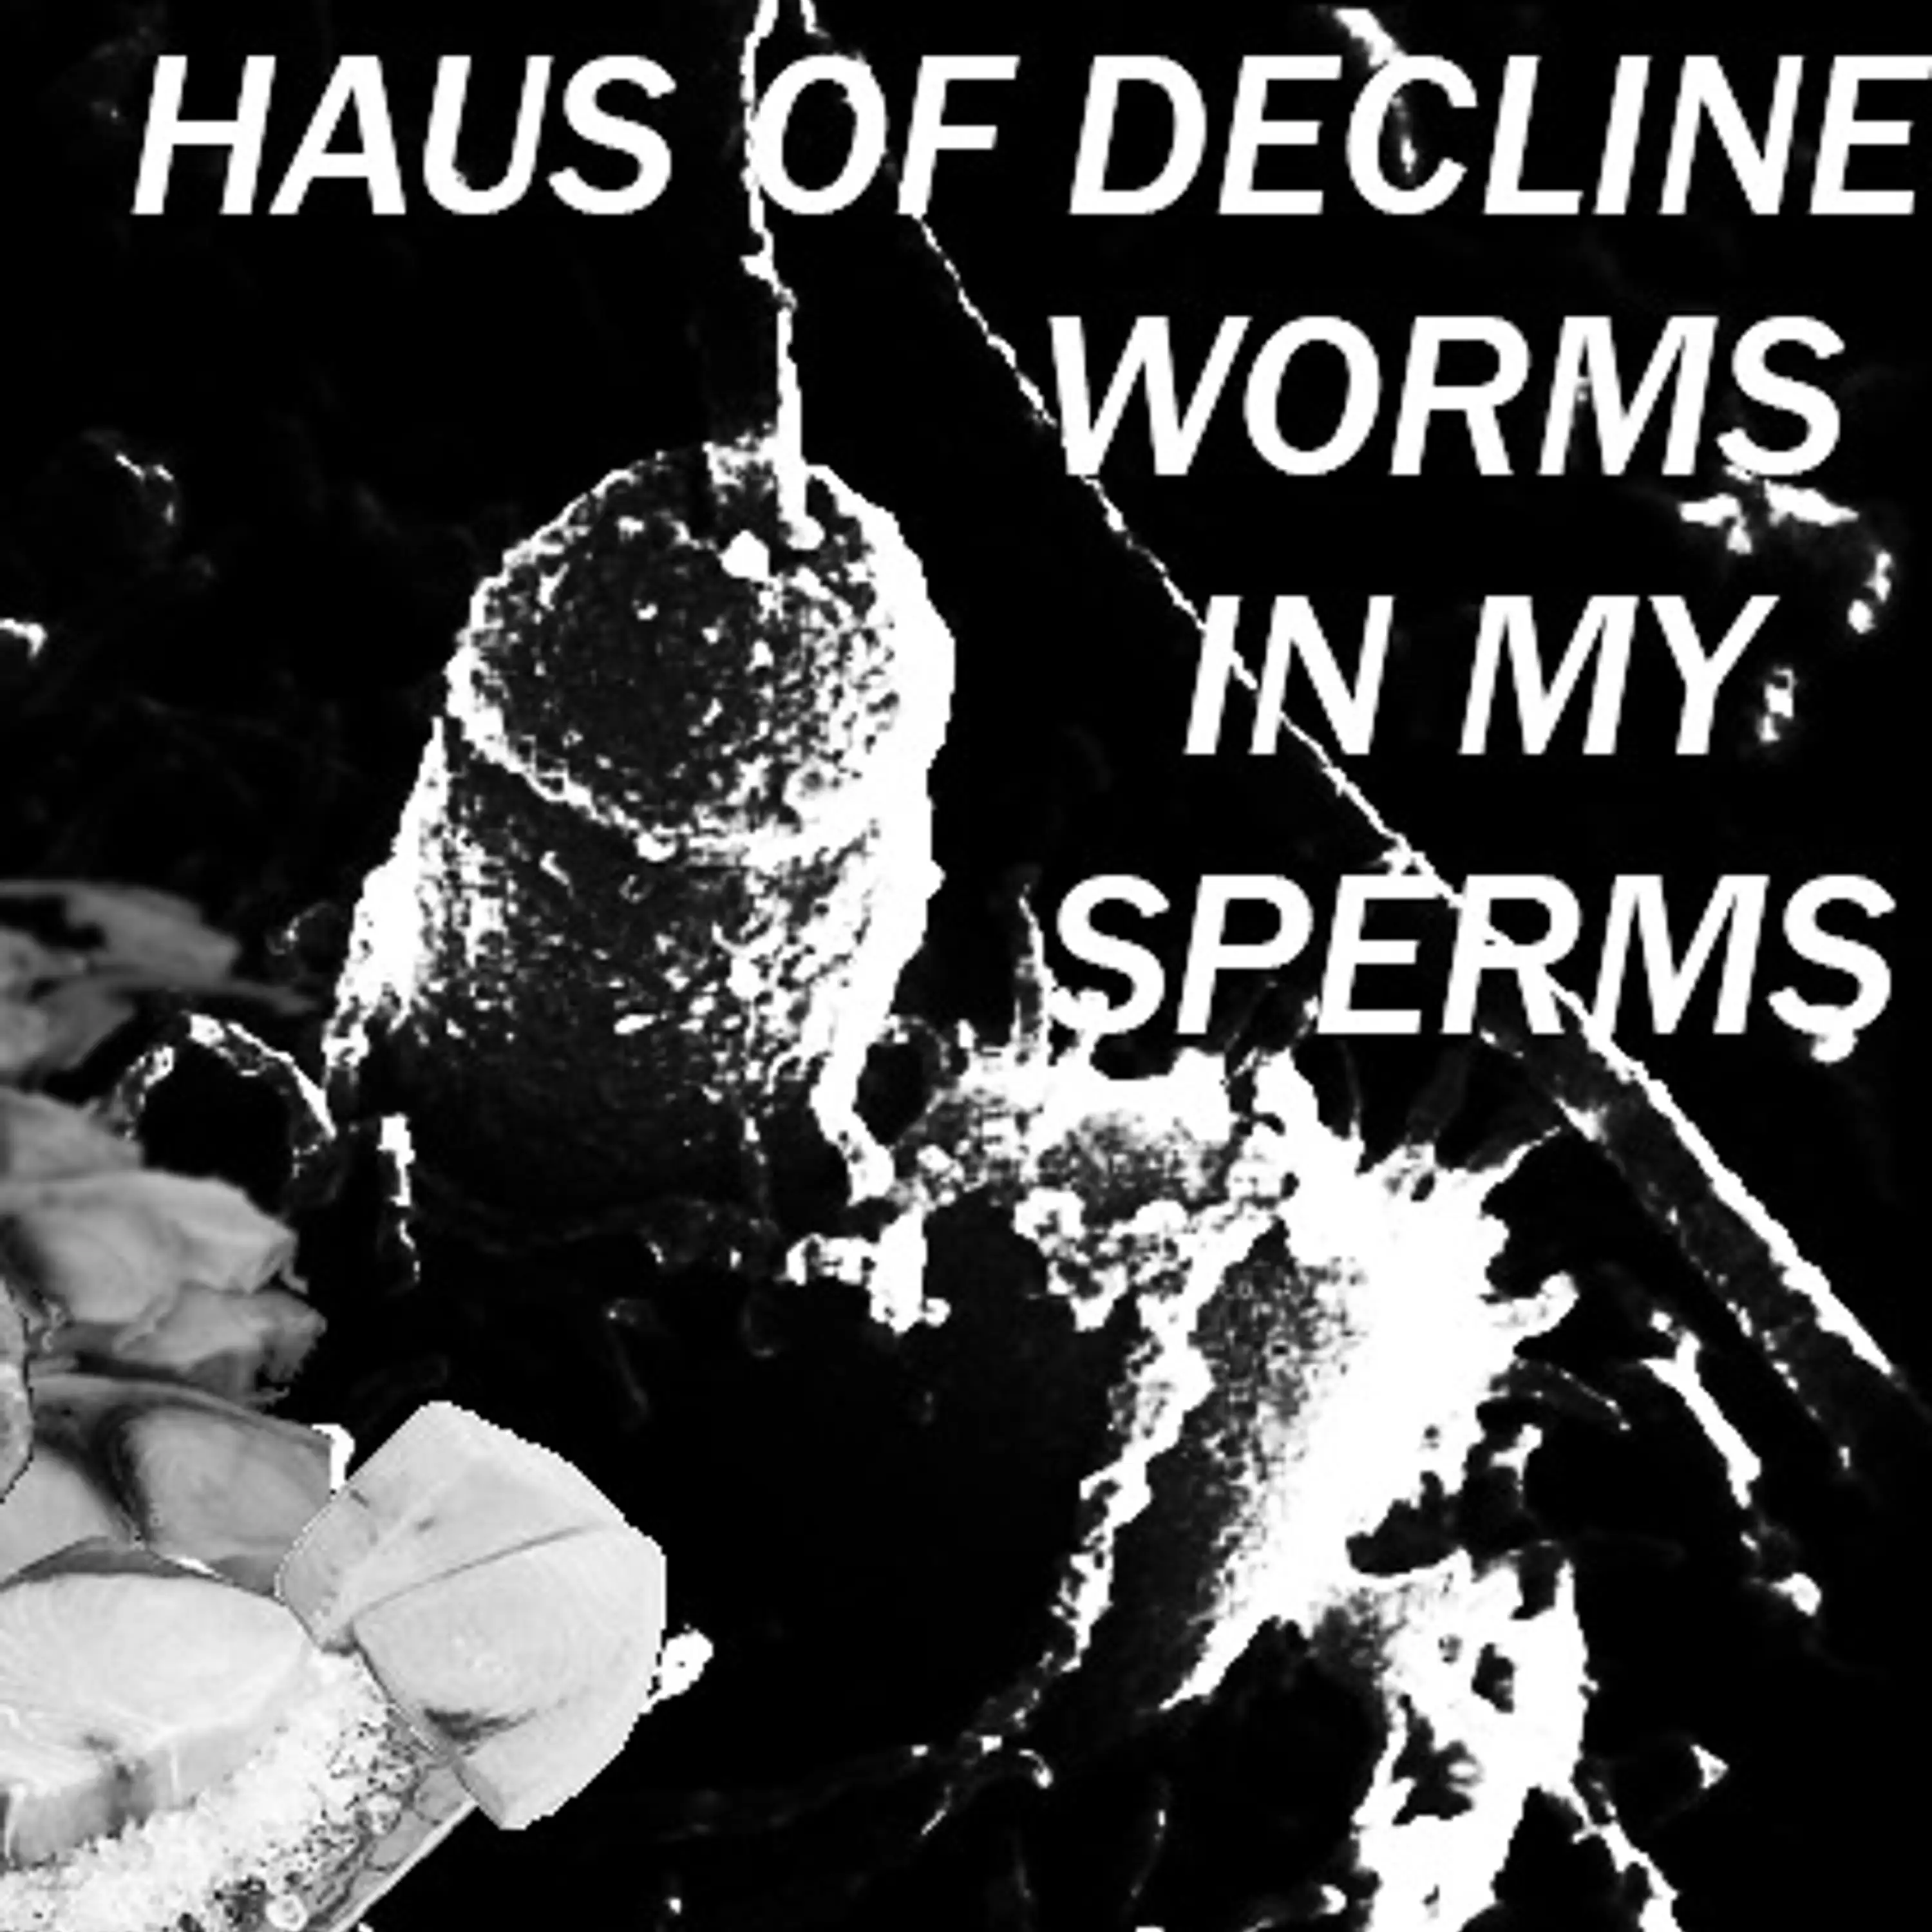 Worms in My Sperms